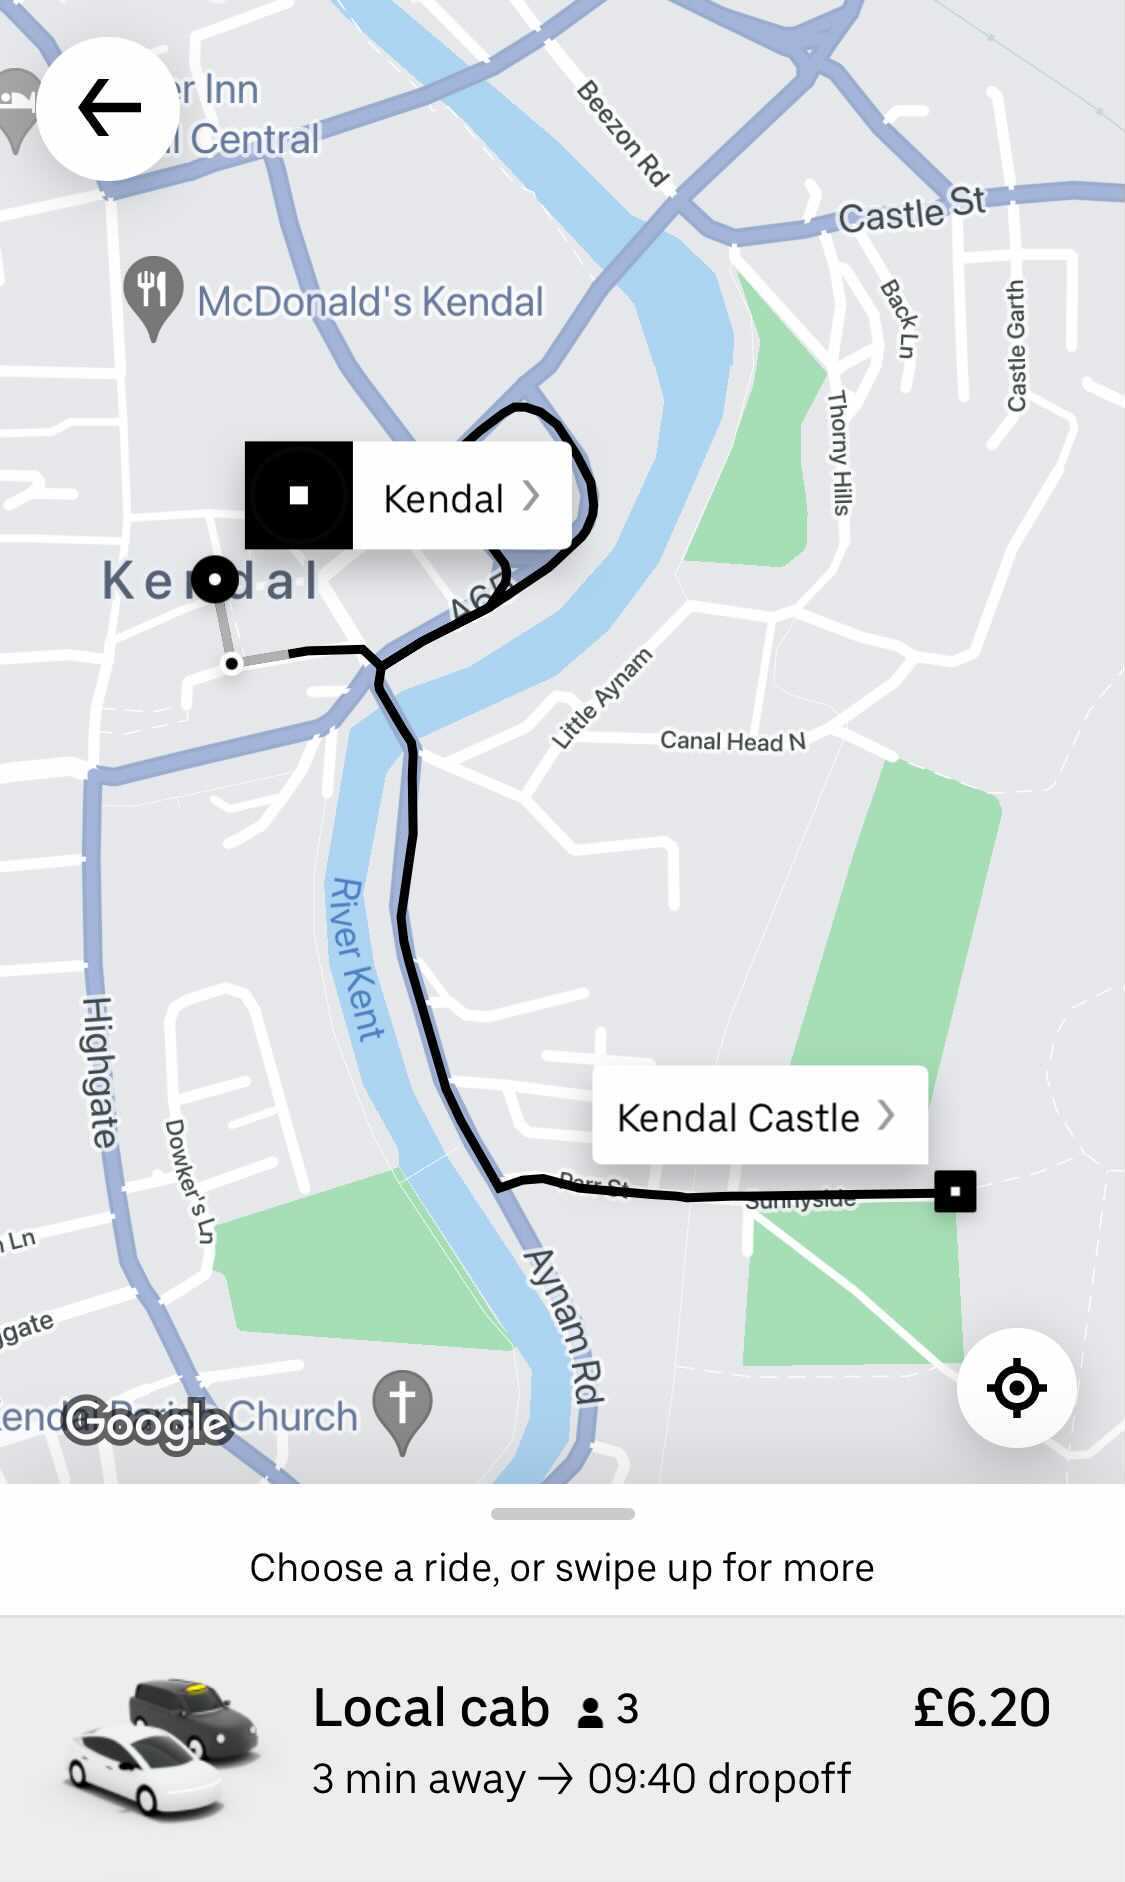 EXAMPLE: Kendal Local Cab